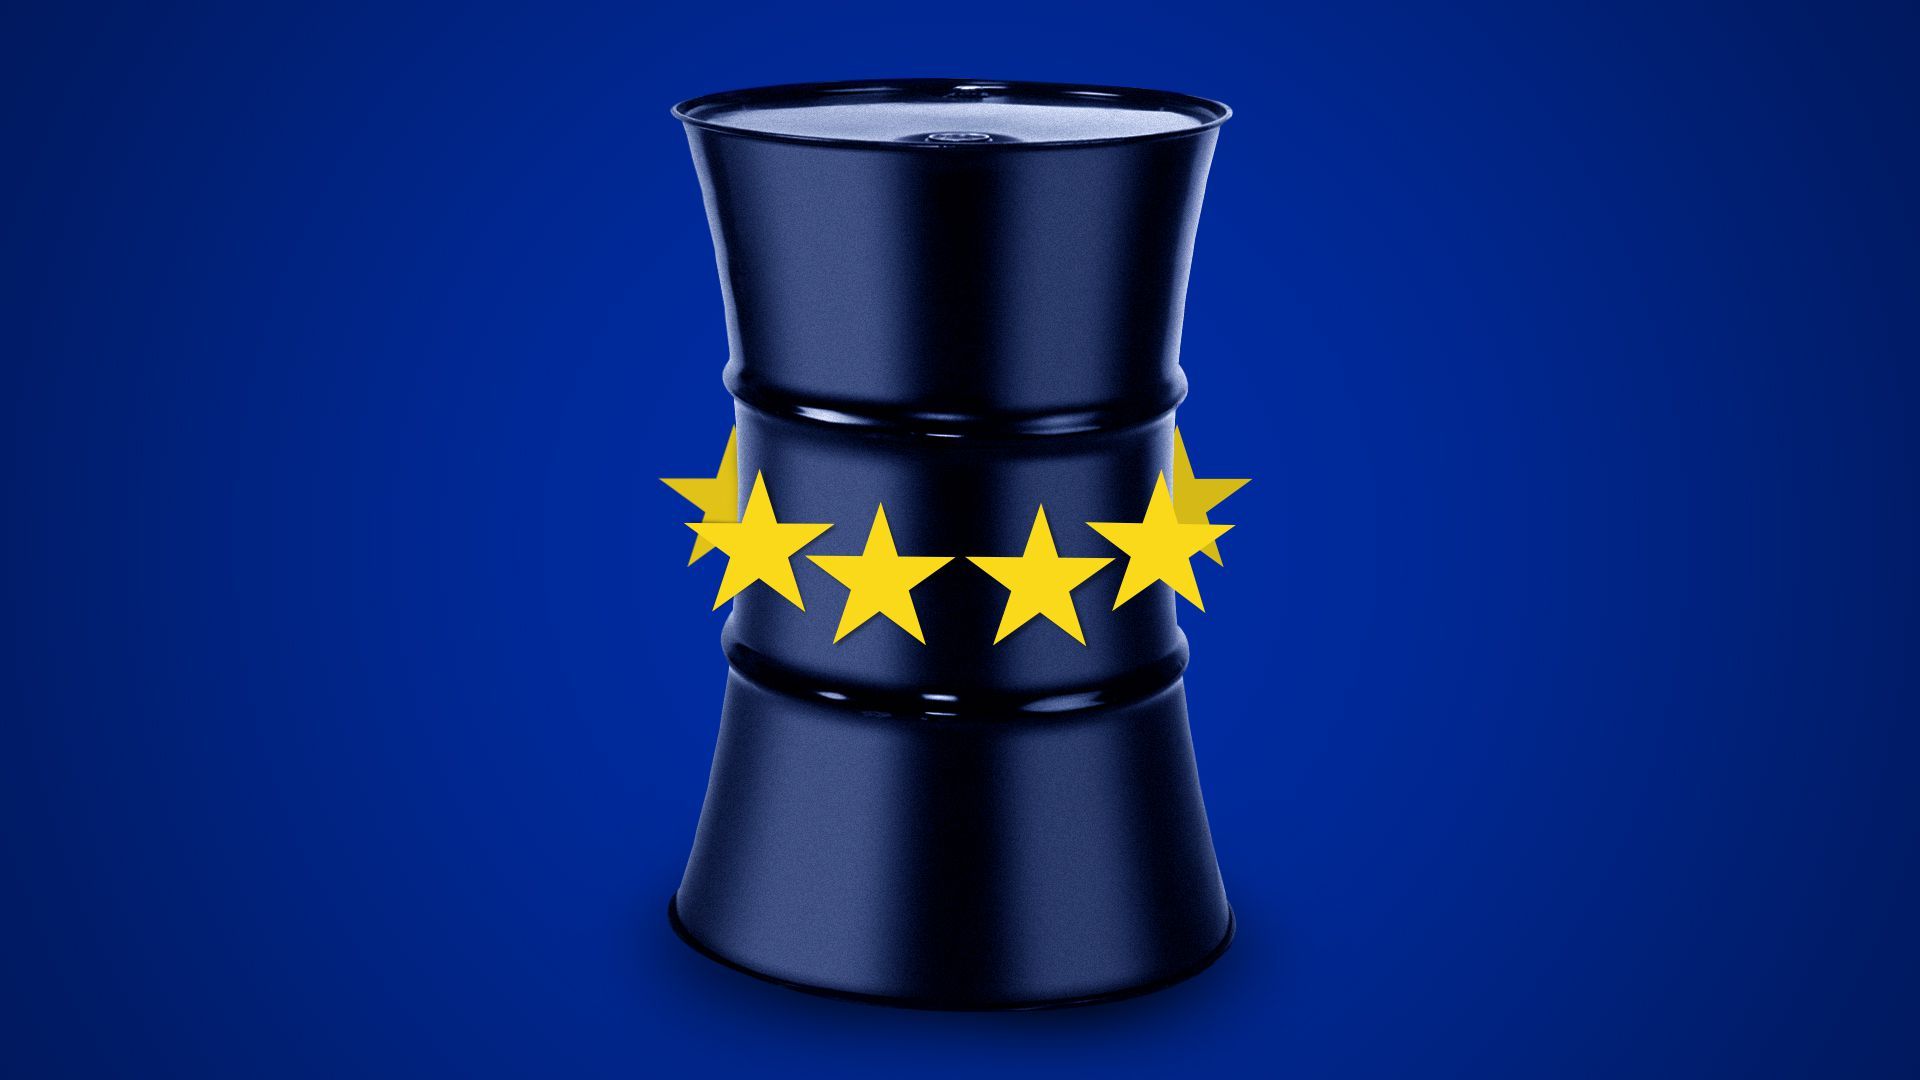 Illustration of stars from the European Union flag squeezing an oil drum.